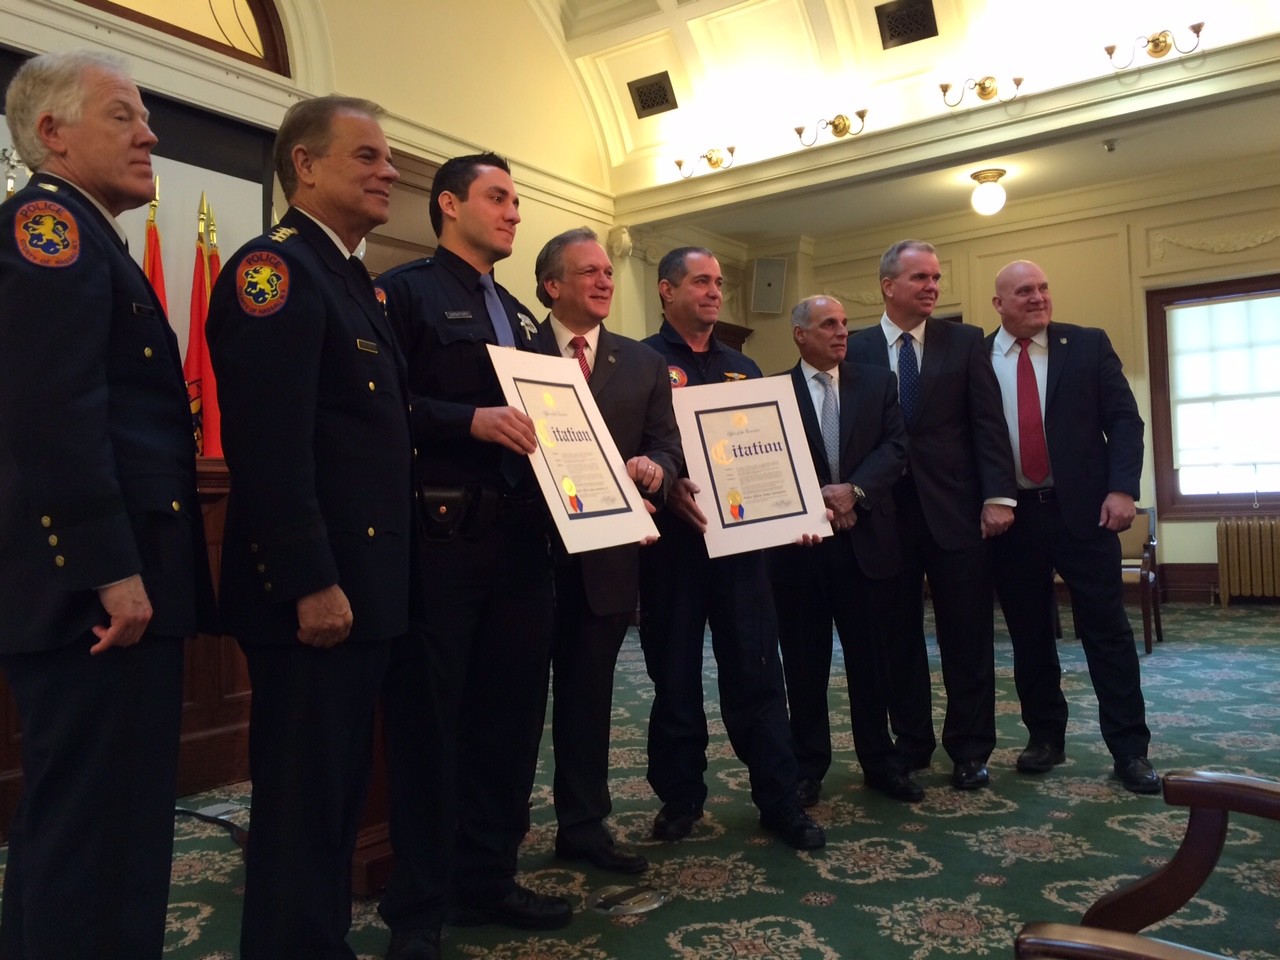 County Executive Ed Mangano honored officers James Sarnataro Jr., third from left, and James Sarnataro Sr., for their parts in the rescue of a drowning man. (Rebecca Melnitsky/Herald)